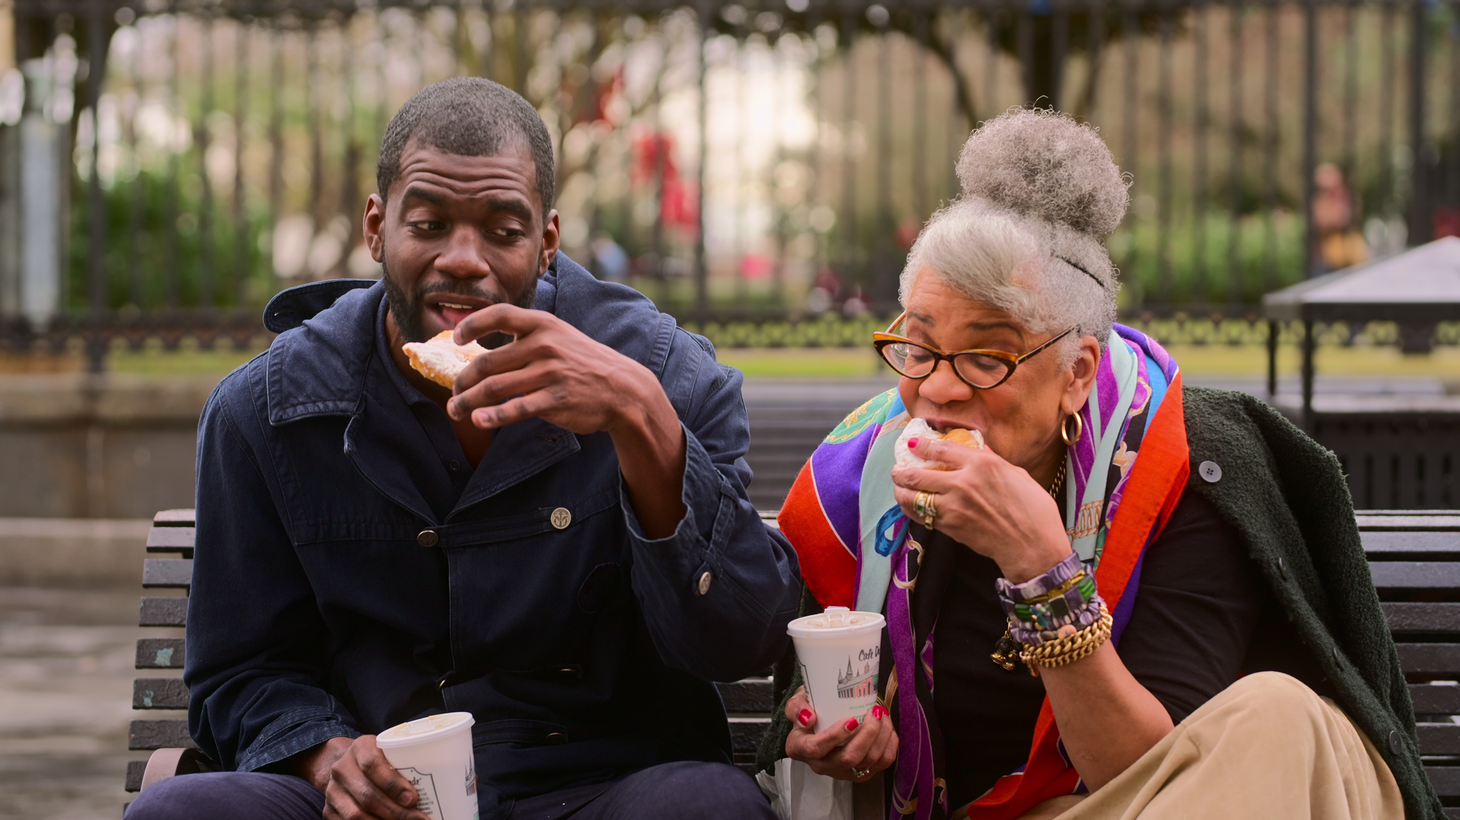 Based on the book by Dr. Jessica B. Harris (right), Stephen Satterfield explores how Black people have shaped American cuisine in season 2 of "High on the Hog."